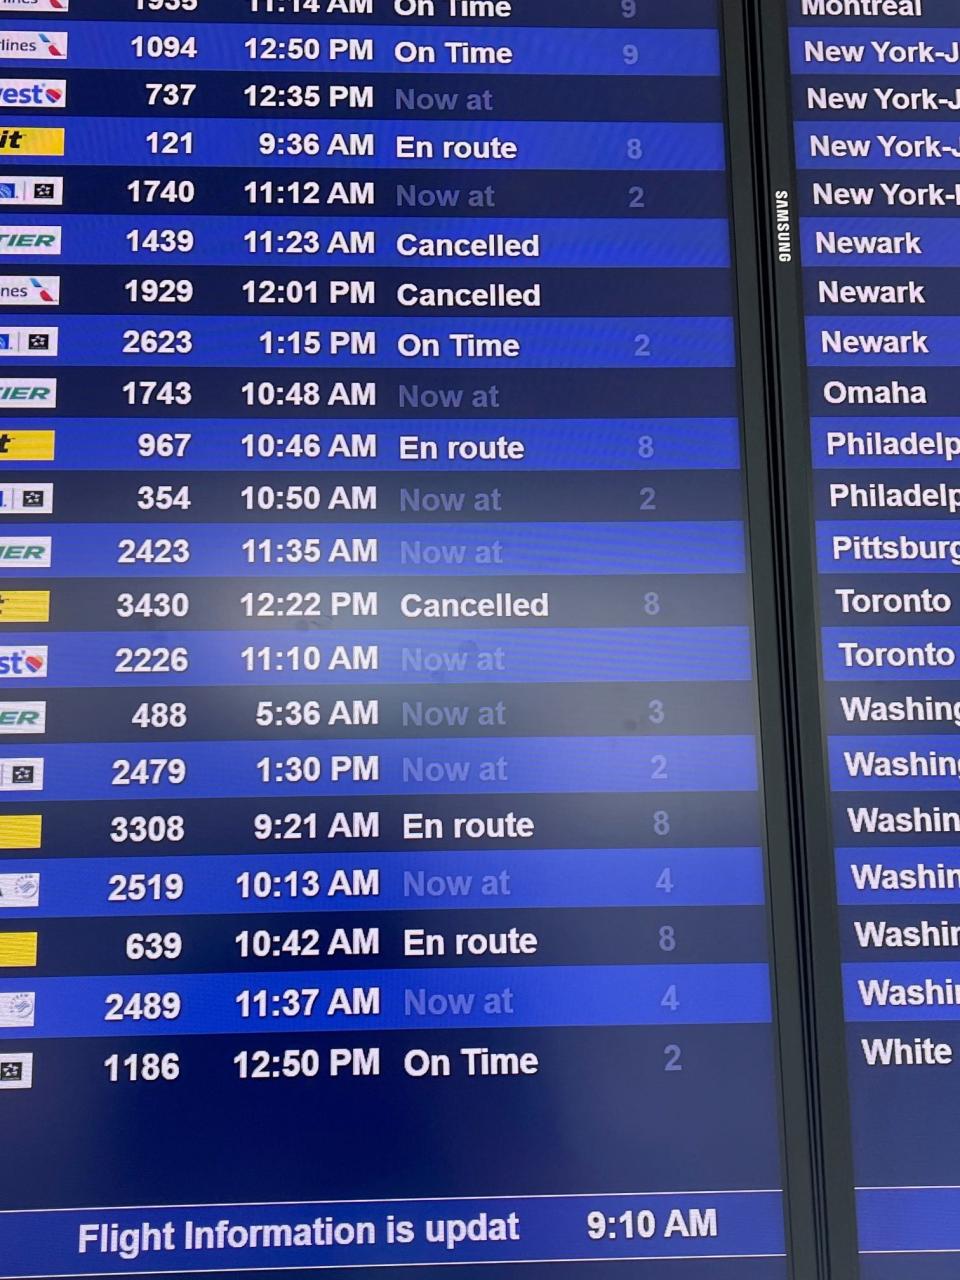 The thousands of flights cancelled or delayed Saturday and Sunday across the U.S. seemed to have little effect on travelers heading out from Southwest Florida International Airport on Sunday.